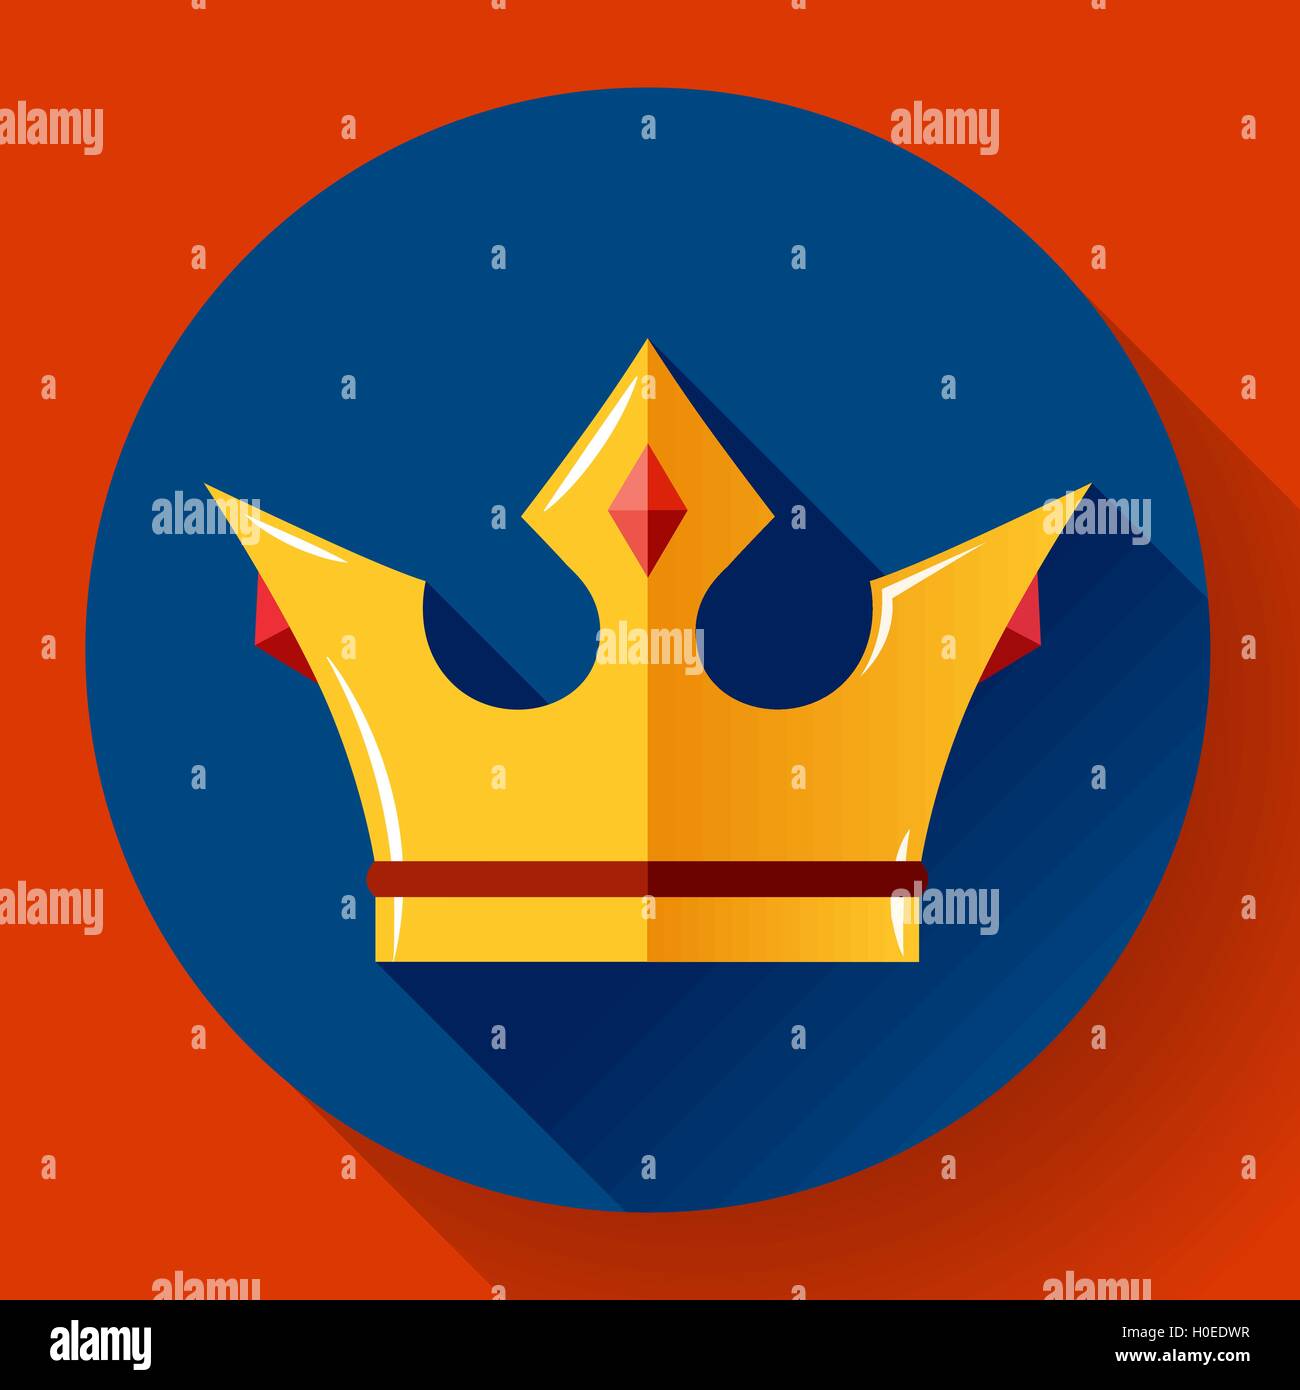 Gold crown with rubies. Flat design style. Stock Vector